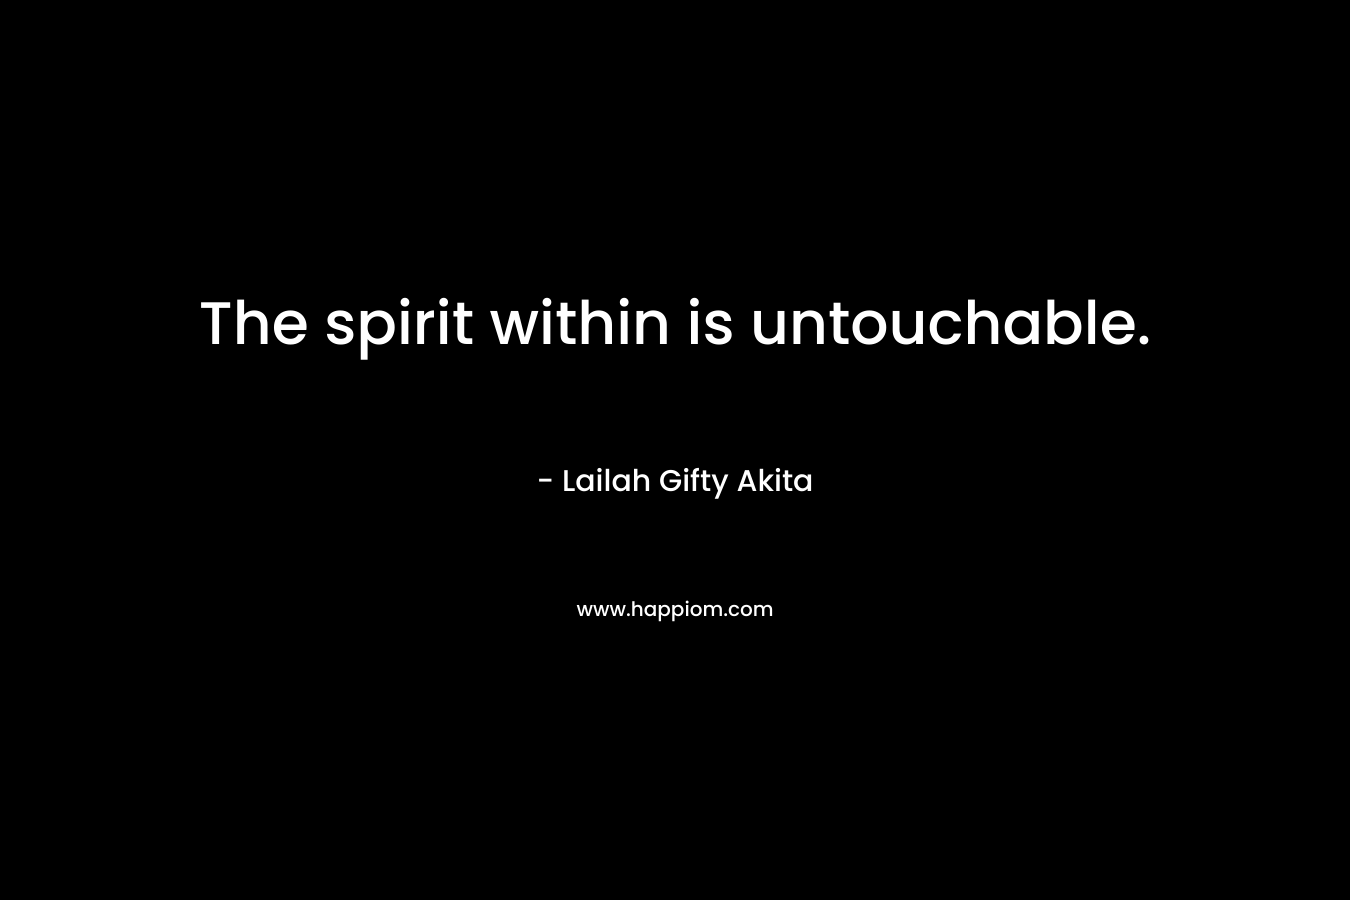 The spirit within is untouchable.